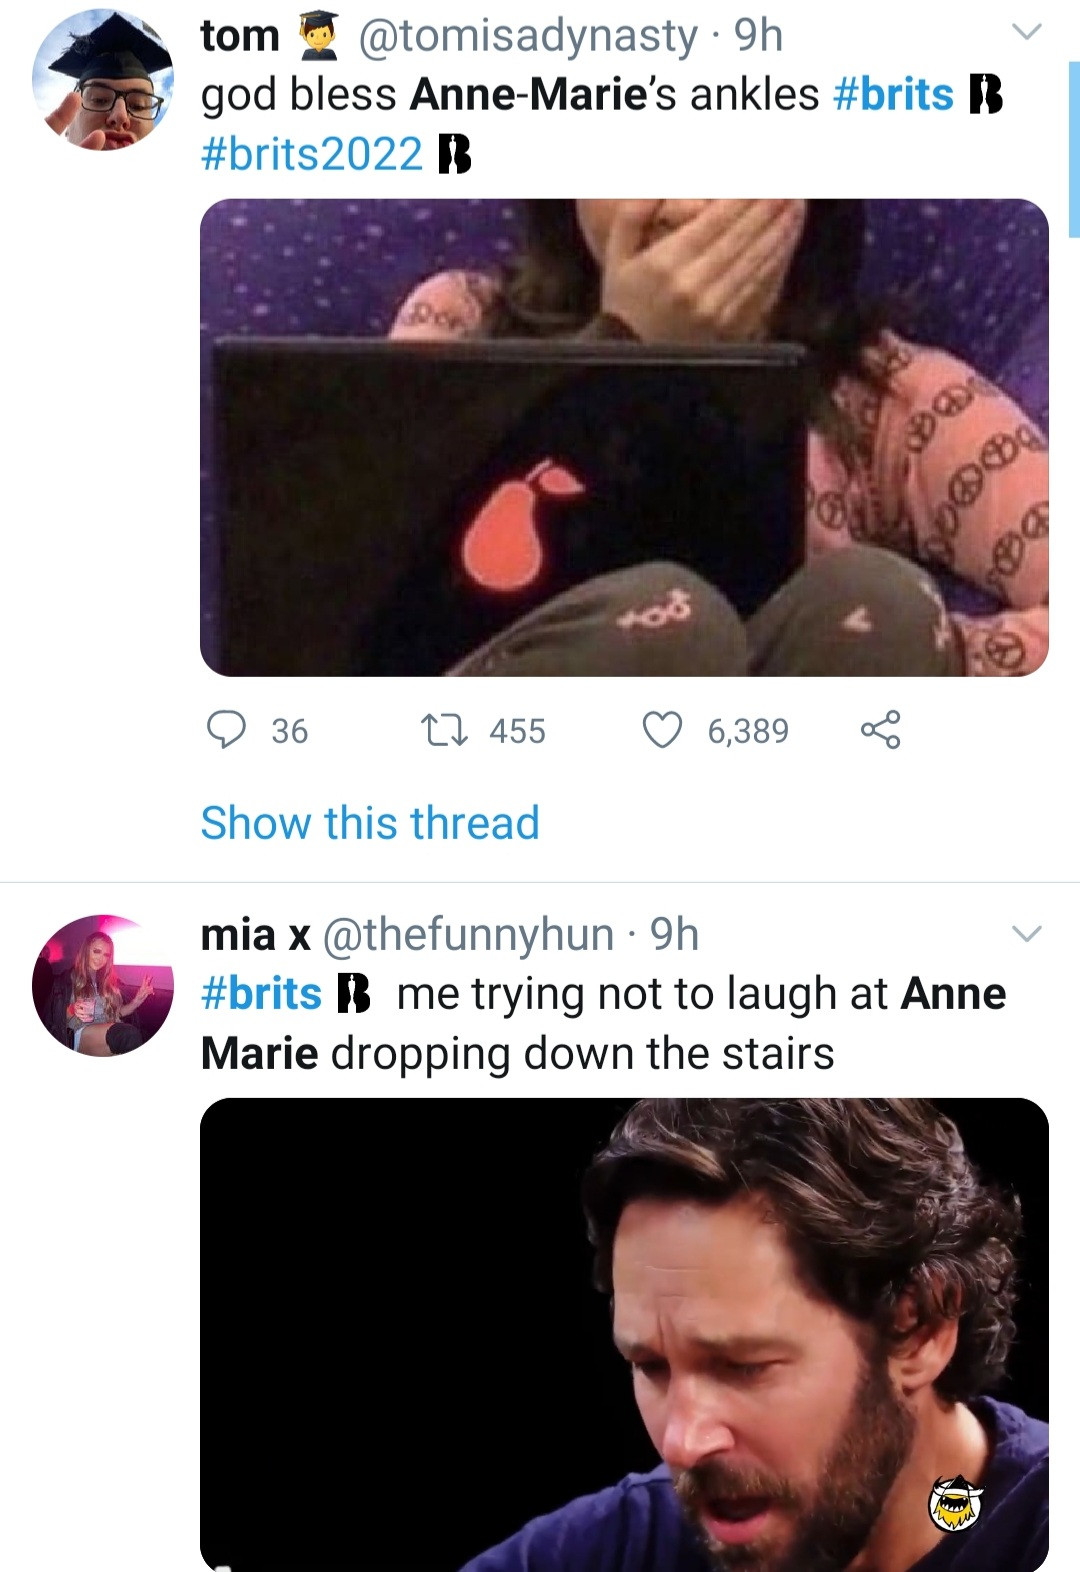 Singer Anne-Marie falls down stairs while performing at the BRITs Awards 2022